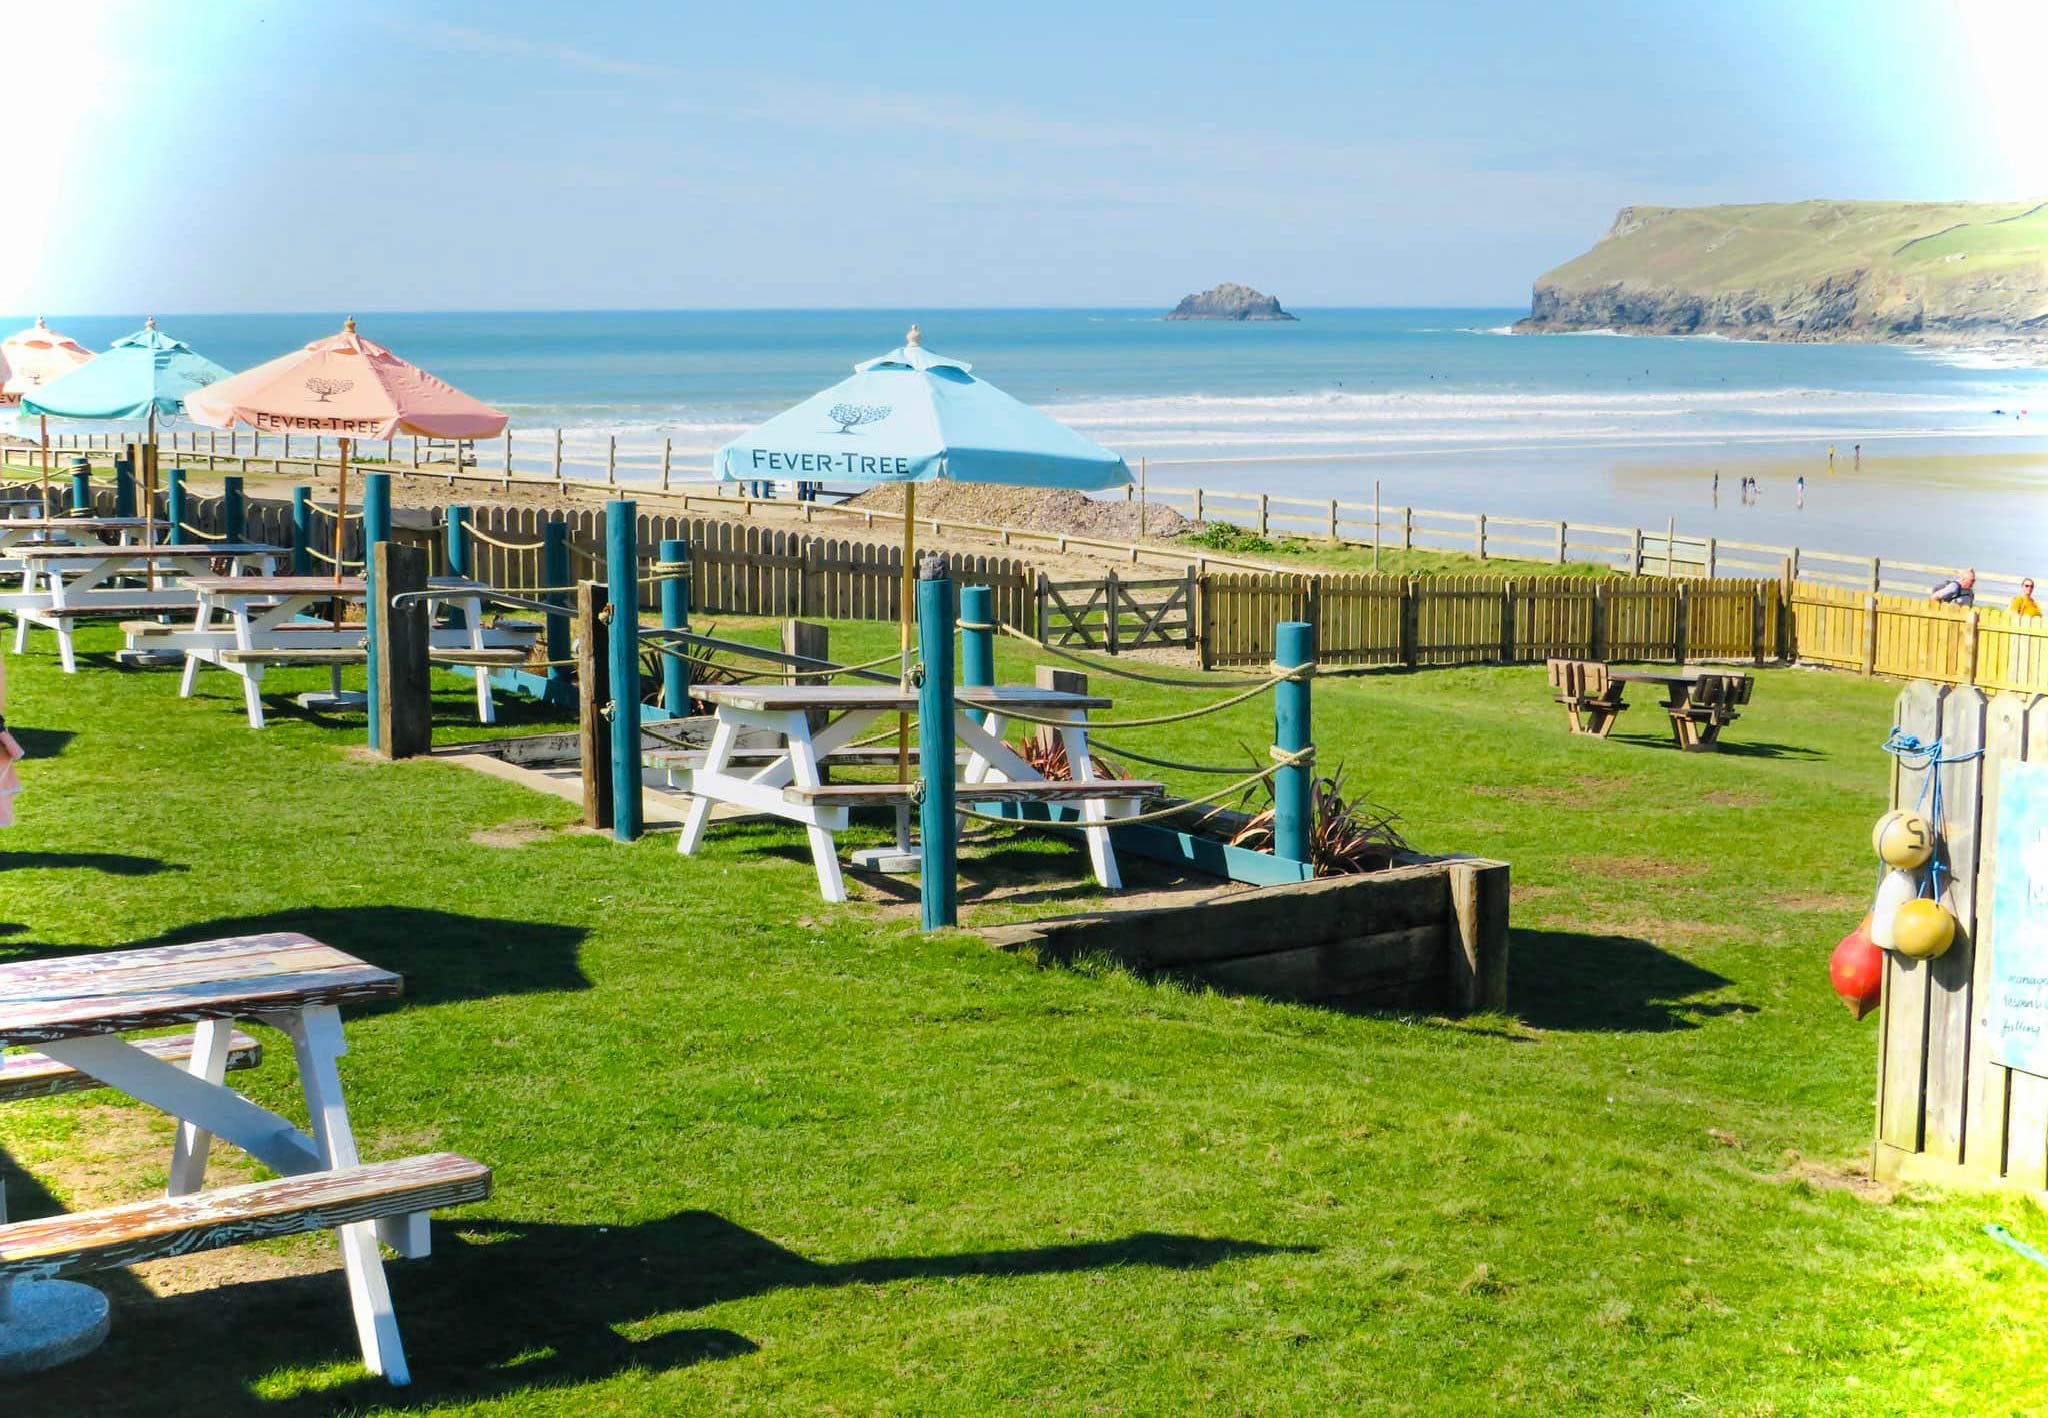 1 of the Best Places to Eat Out in Polzeath | Restaurants, Cafes & Pubs